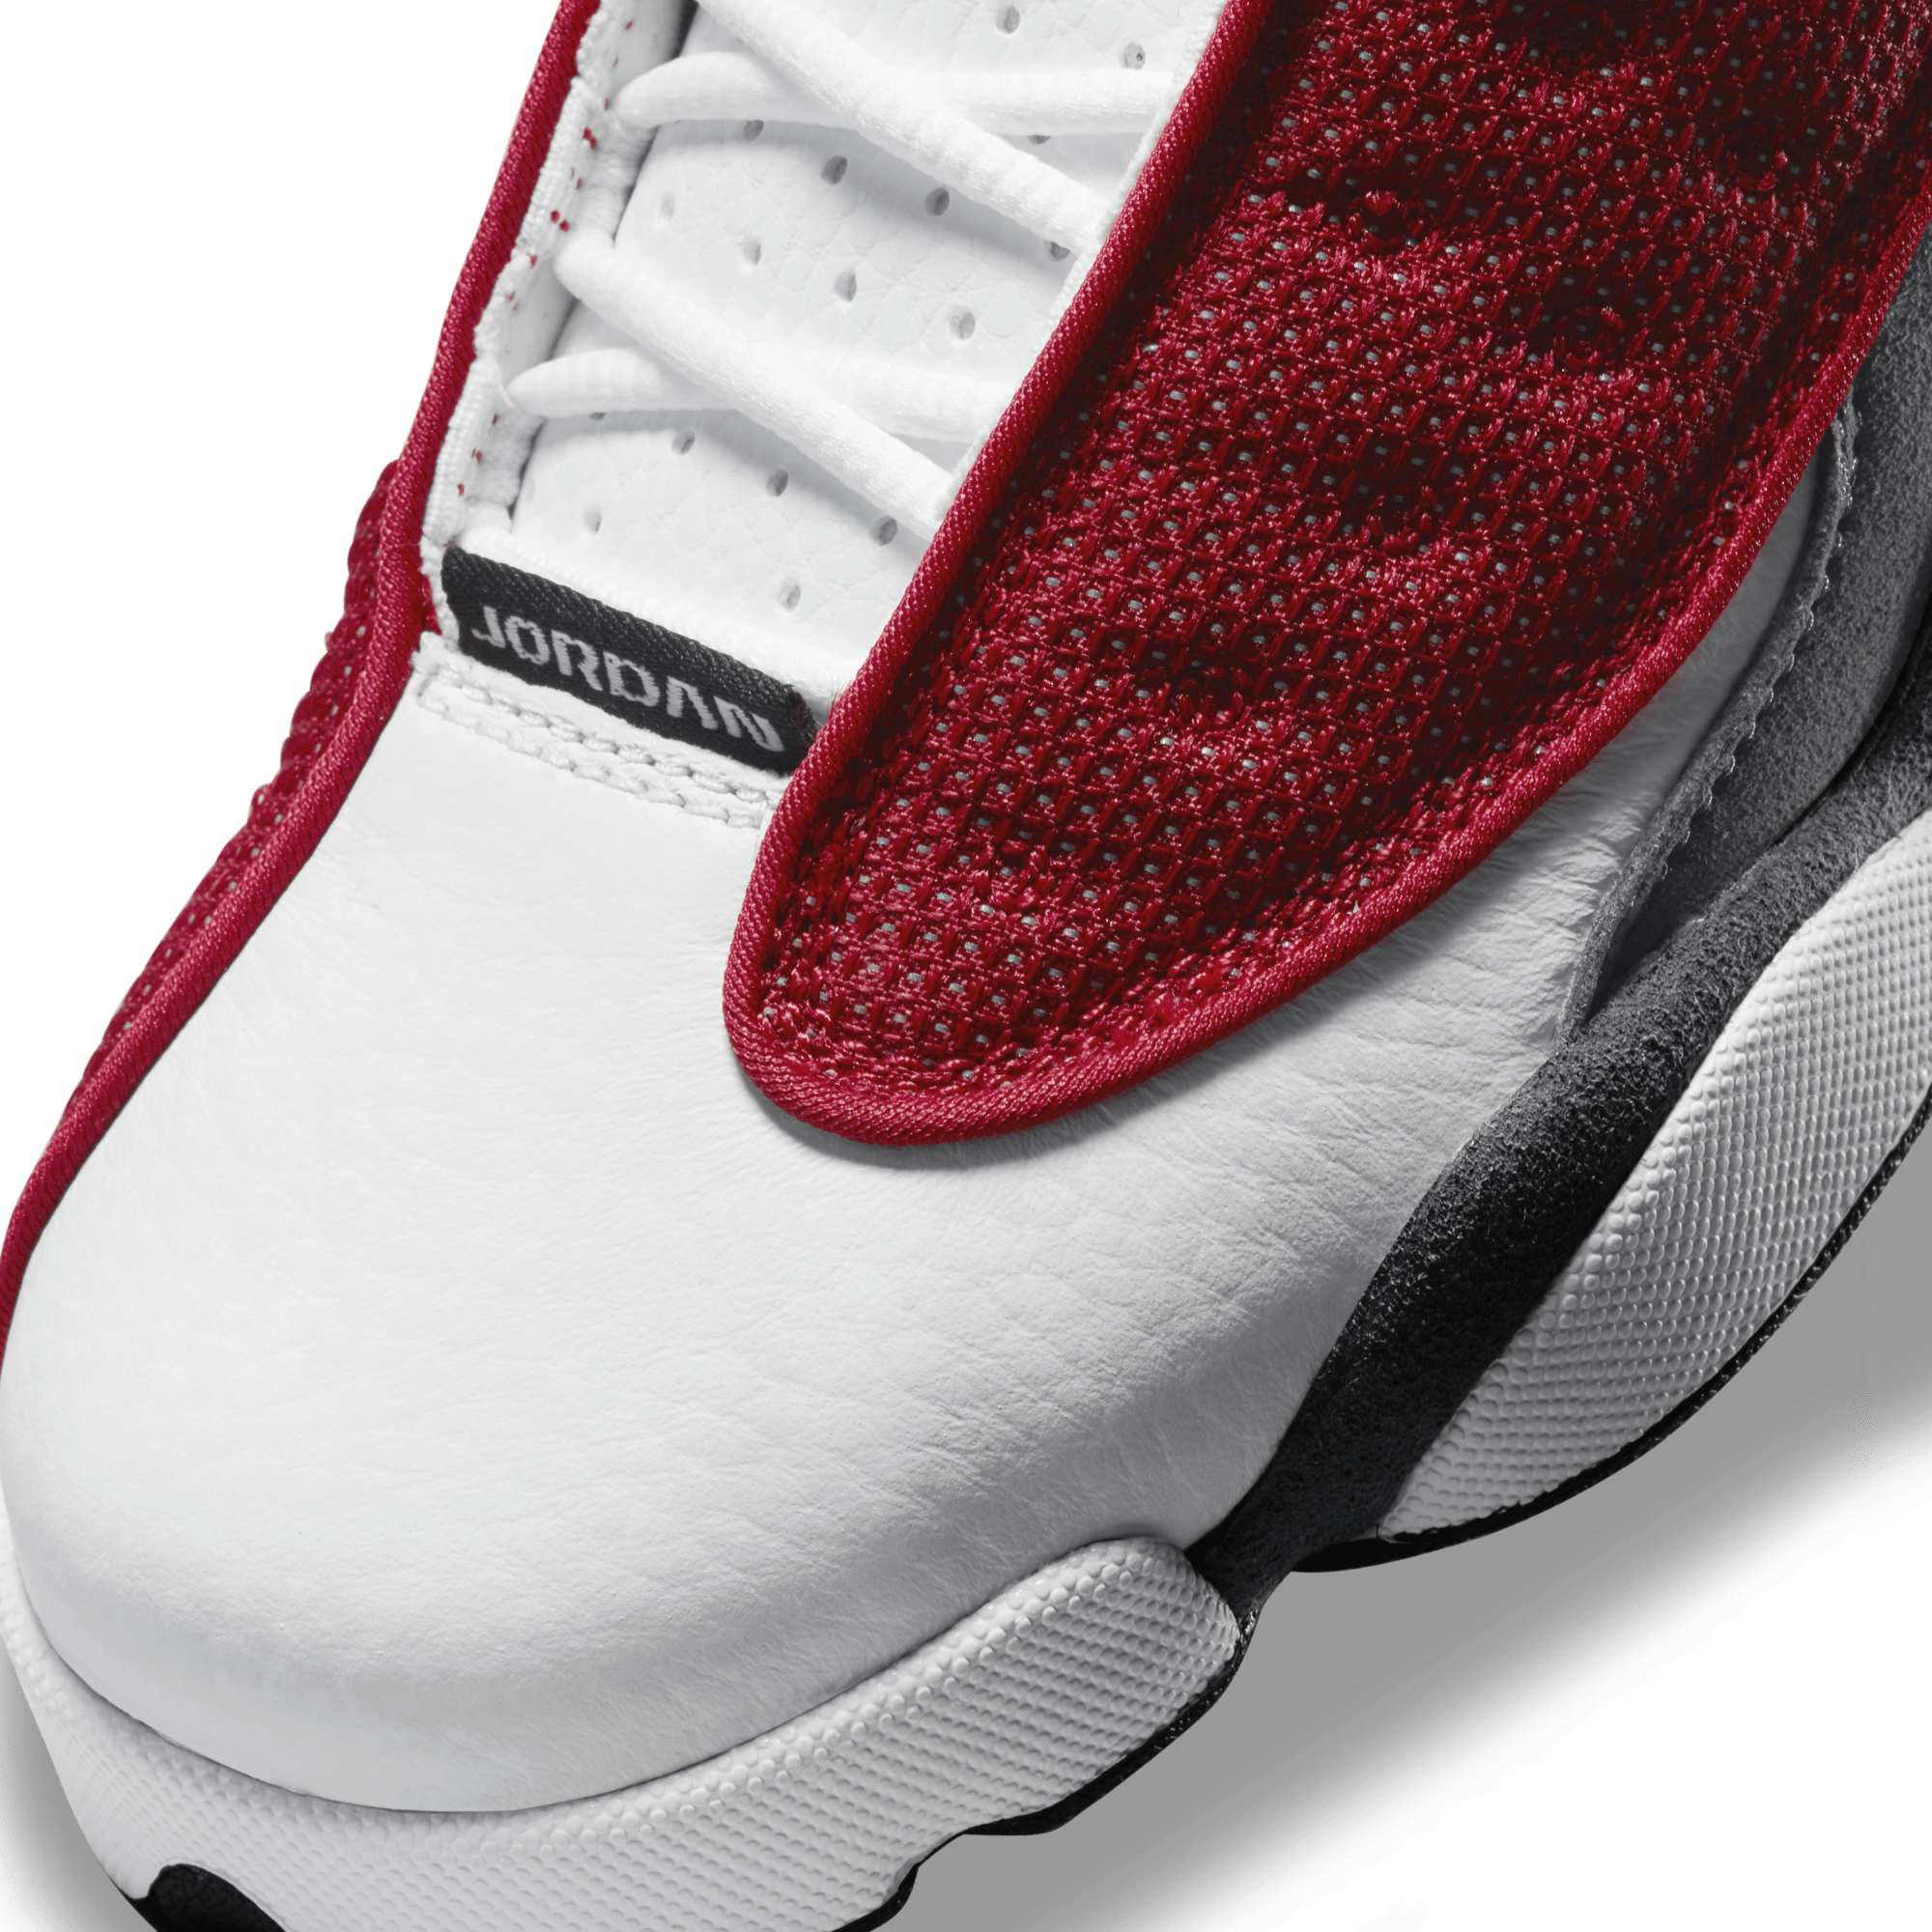 Air Jordan 13 Mix Dior White Limited Edition Sneaker Shoes